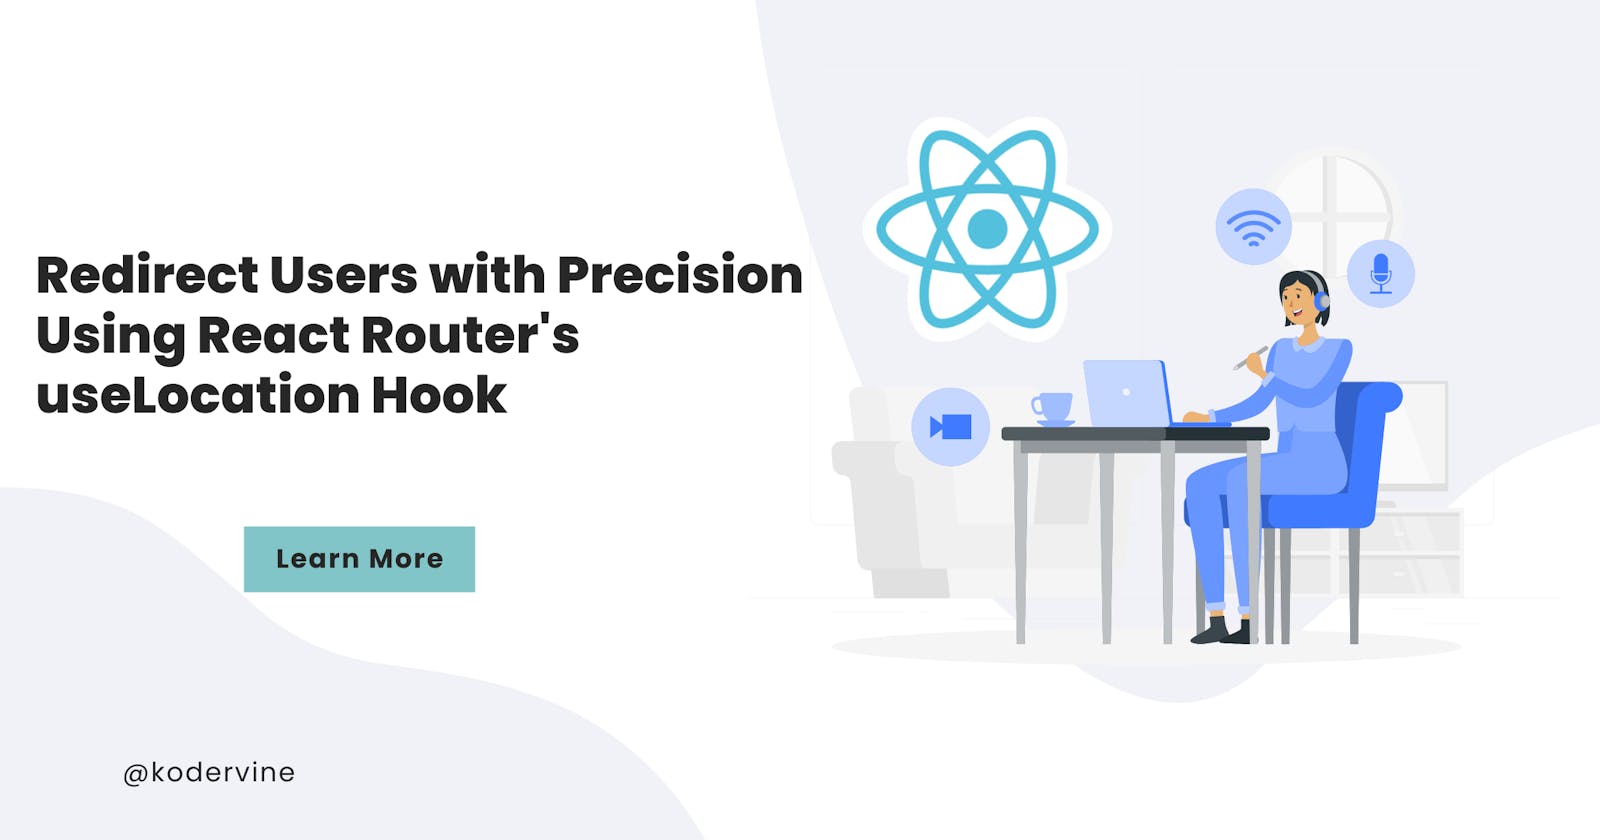 Redirect Users with Precision Using React Router's useLocation Hook